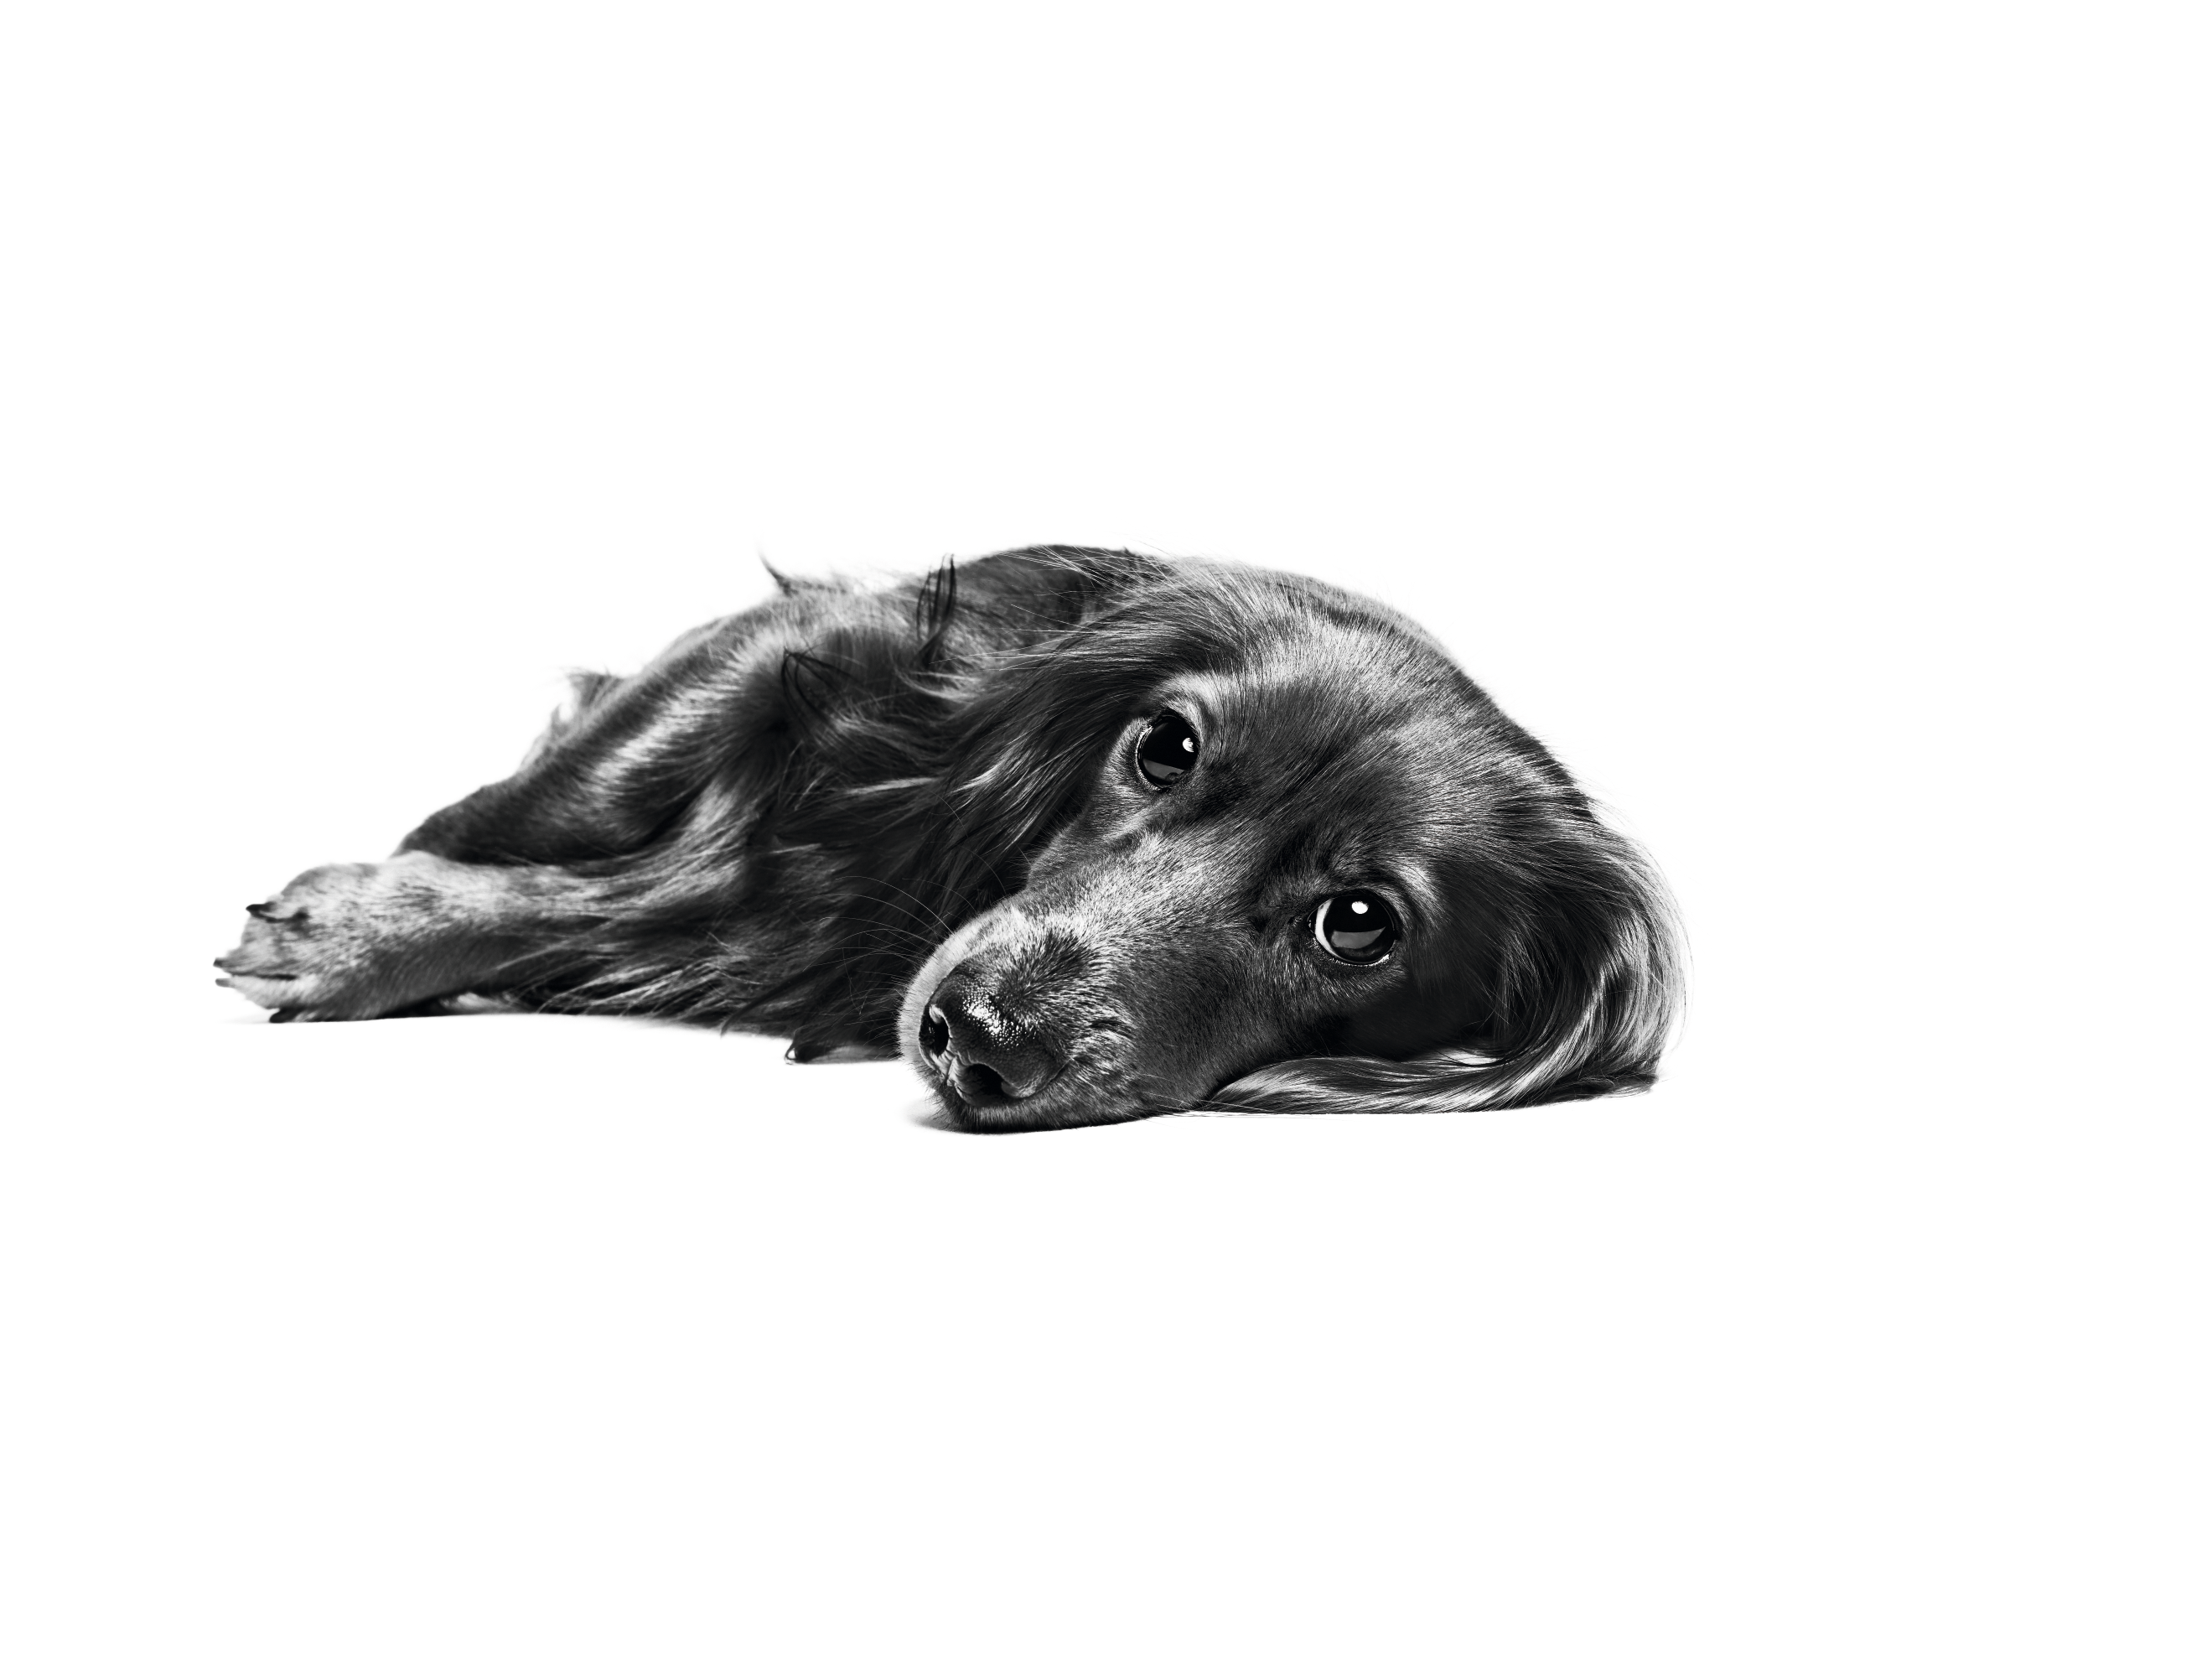 Dachshund adult lying down in black and white on a white background